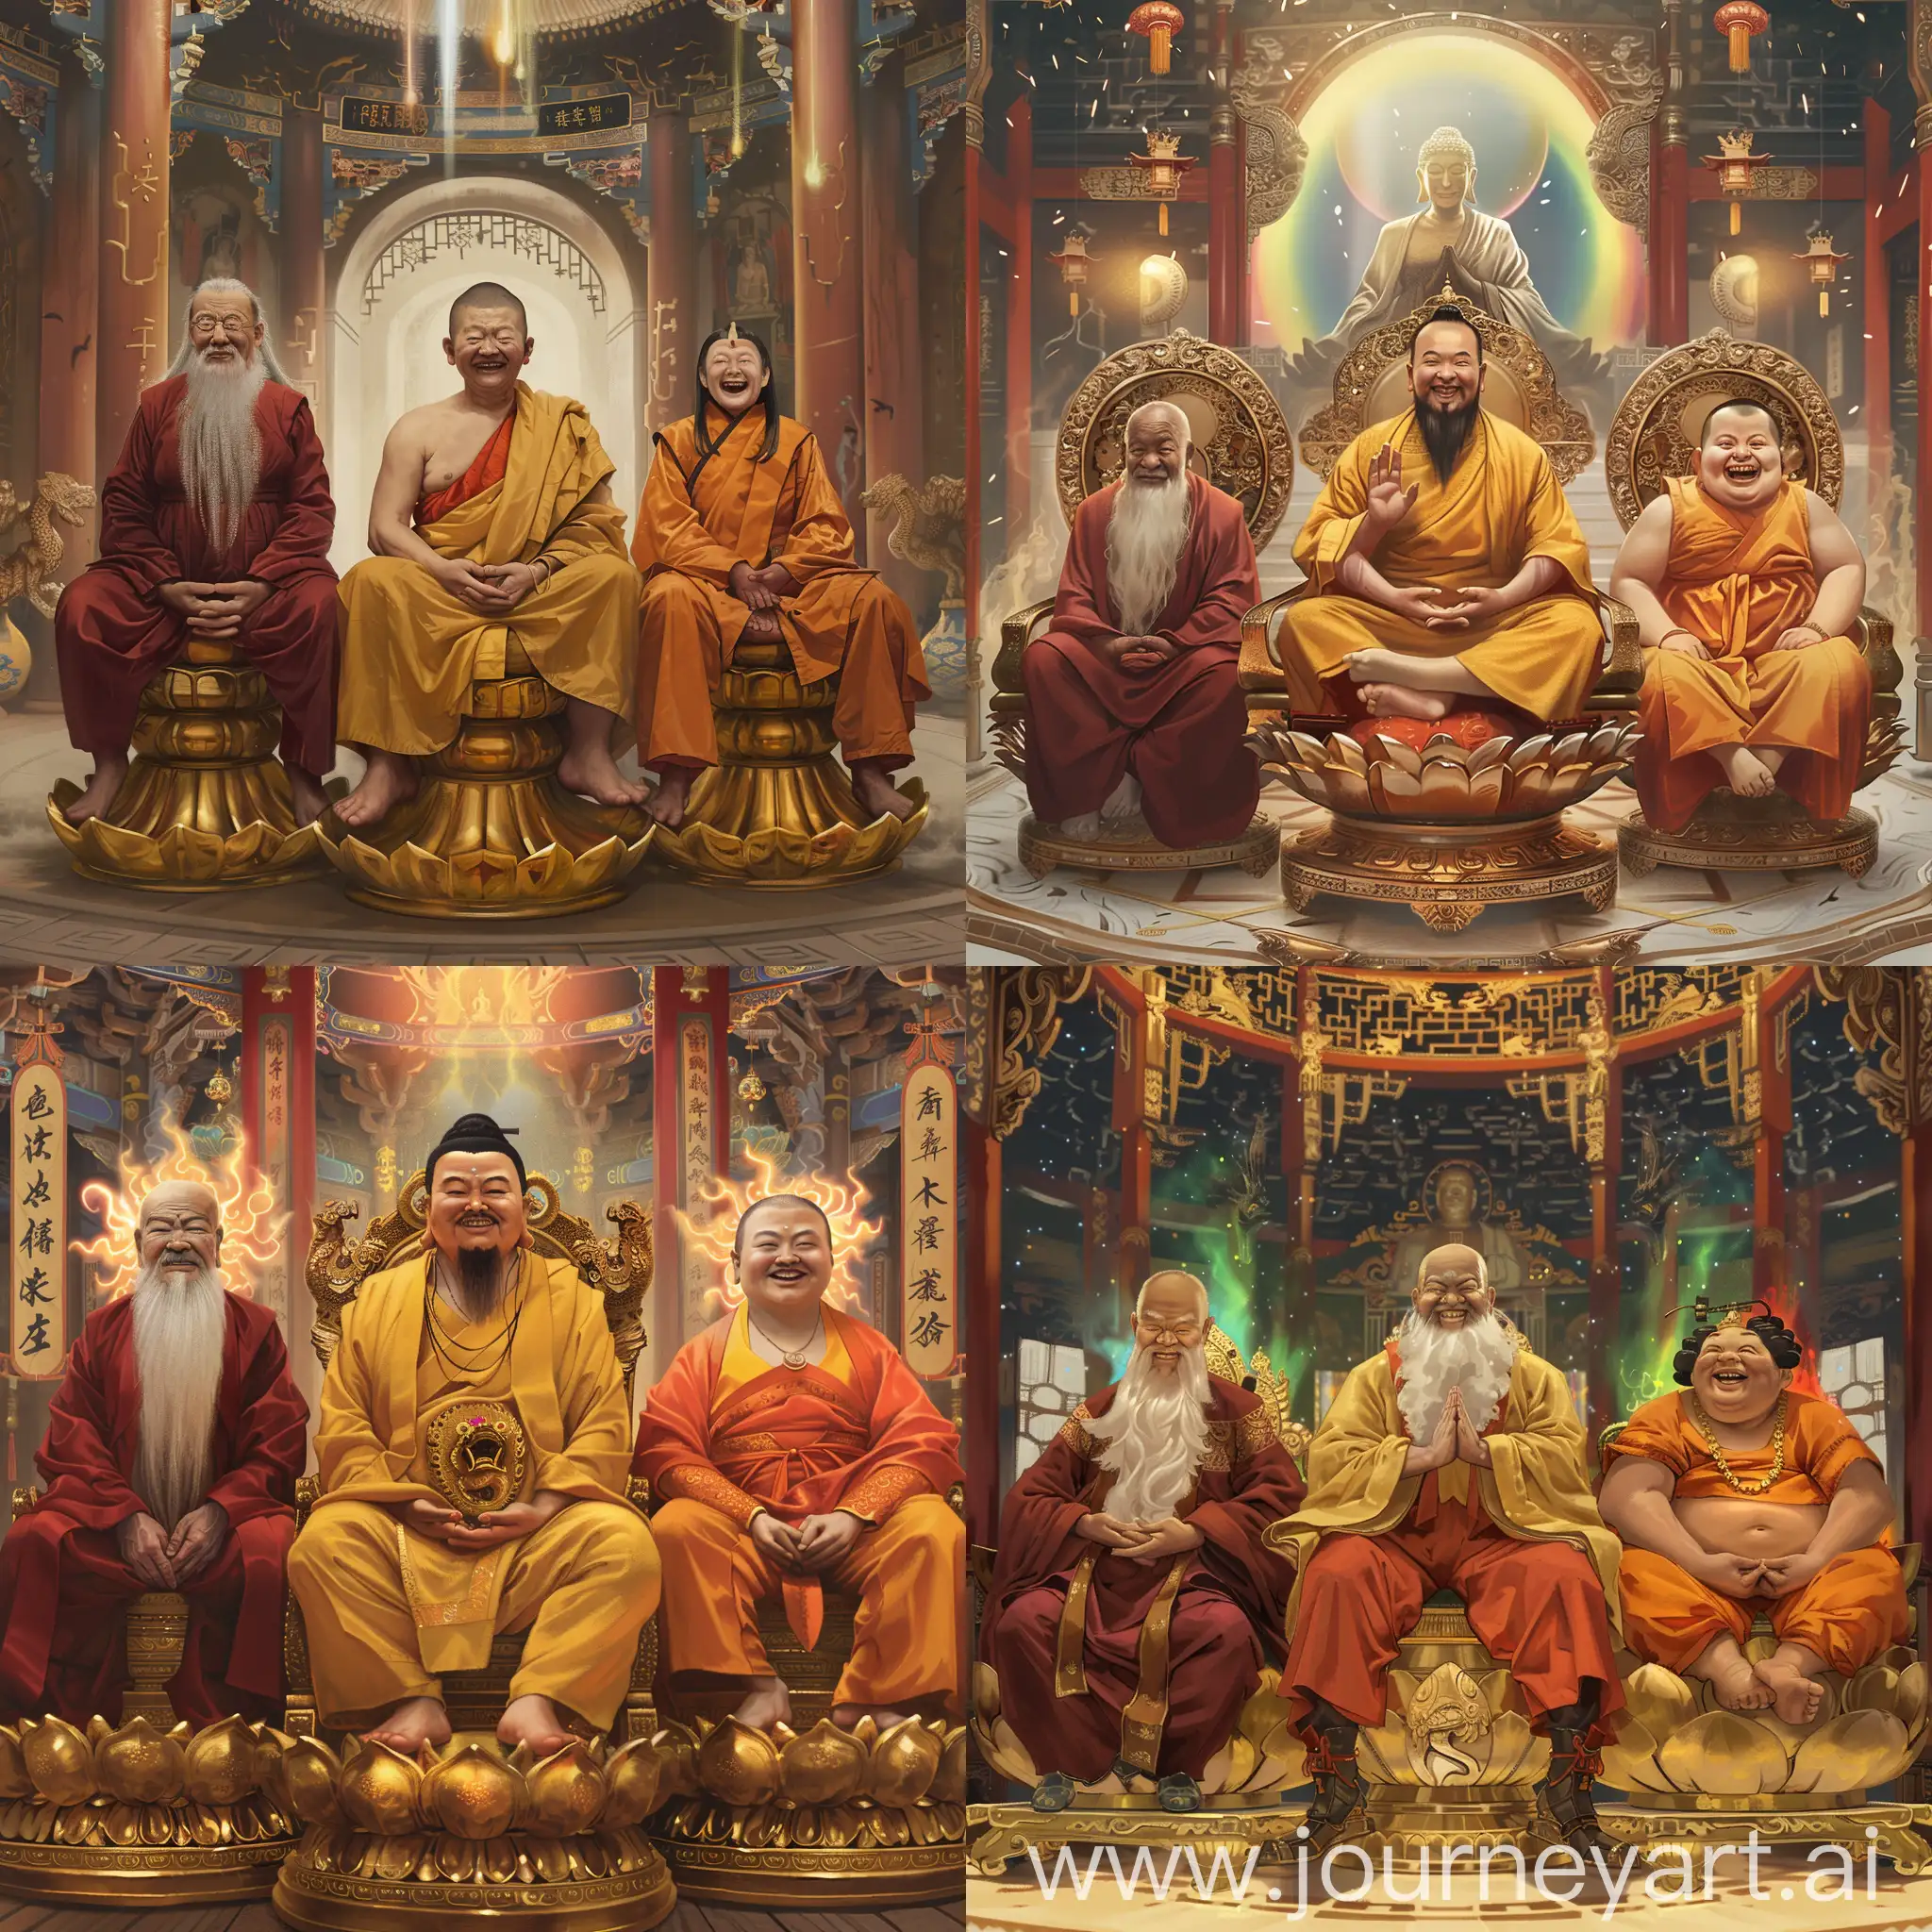 Painting mode: three people are in mediation on their golden lotus thrones.

At left, an serious old Chinese Buddhist senior with long white beard and deep red Chinese Buddhist clothes.

In the middle, a elegant and serious Indian lord Gautama Buddha, he has black ushnisha on his hair, he wears deep yellow Chinese Buddhist clothes.

At right, a Chinese chubby laughing monk with orange clothes and brown pants.

They all have aurora behind their heads, they are inside a splendid Chinese Buddhist temple.